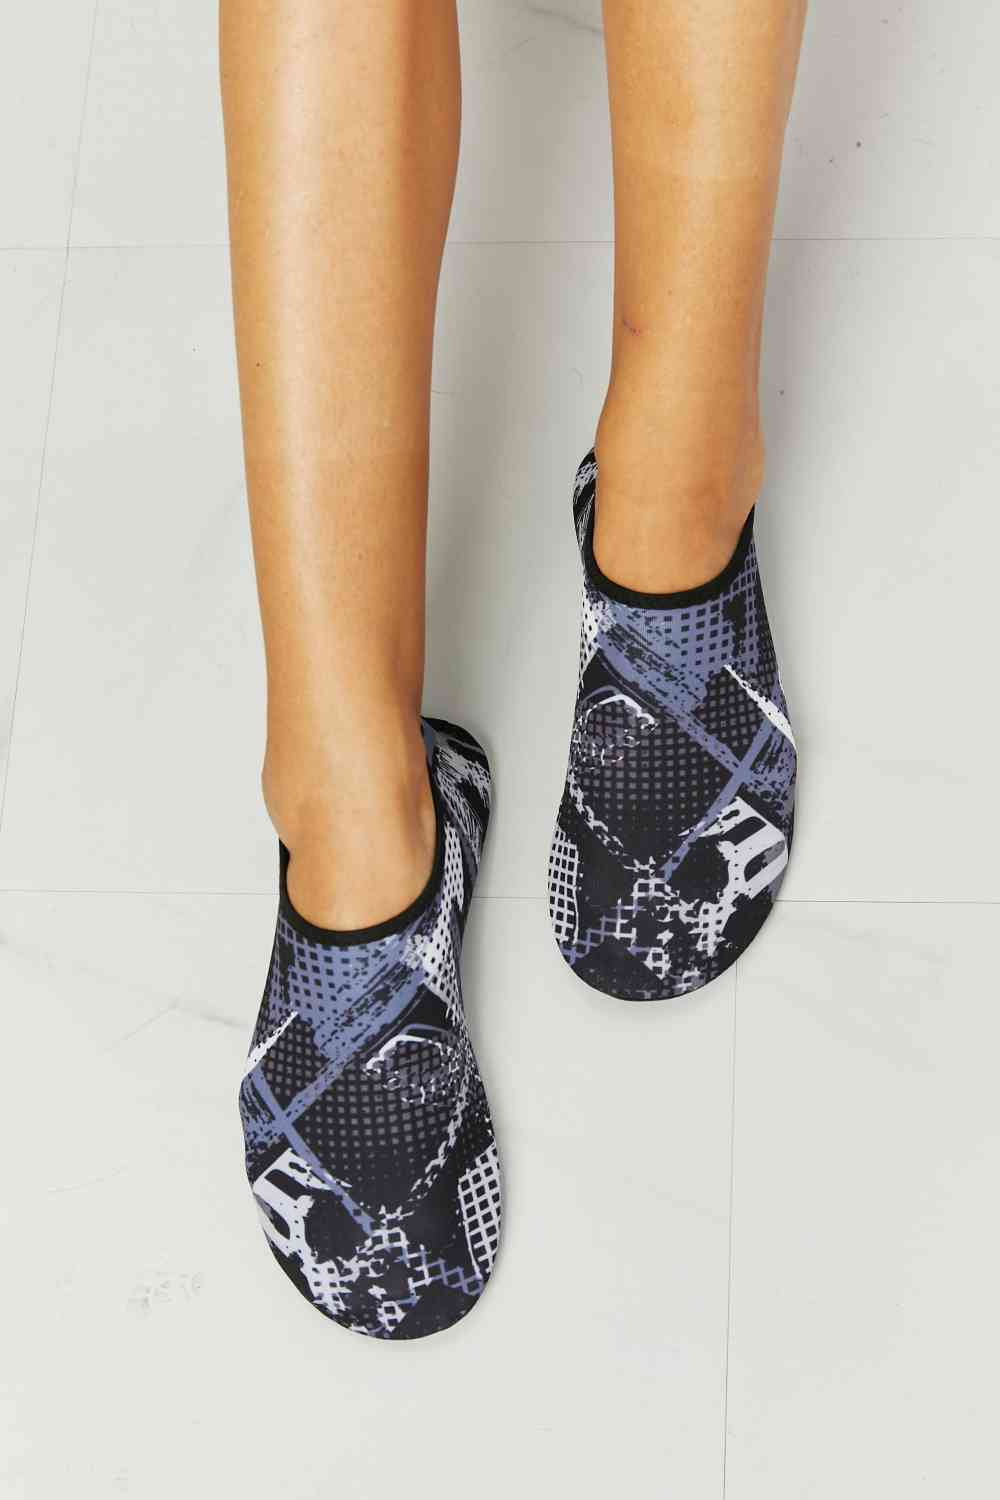 On The Shore Water Shoes in Black Pattern - Kawaii Stop - Aqua Footwear, Beach Adventures, Beach Days, Black Design, Comfortable Shoes, Durable Materials, Kayaking, Melody, Outdoor Activities, Printed Pattern, Rubber Sole, Safety First, Ship from USA, Slip-Resistant, Swimming, US Sizing, Water Protection, Water Shoes, Wet Surfaces